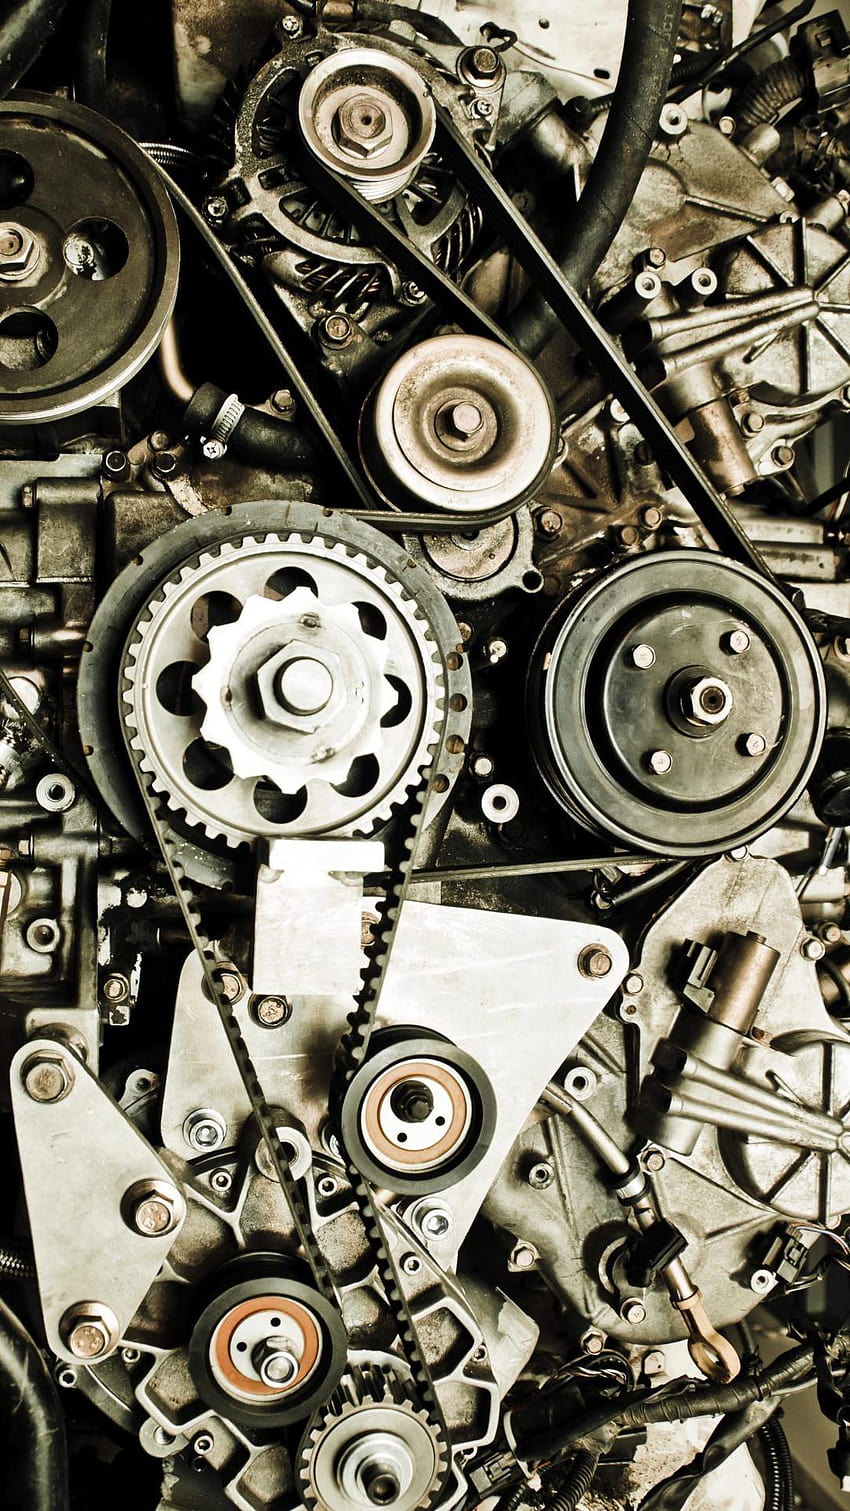 Mechanical Gear APUS Live for Android APK [1080x1920] for your , モバイル & タブレット, 機械工学 iphone HD電話の壁紙